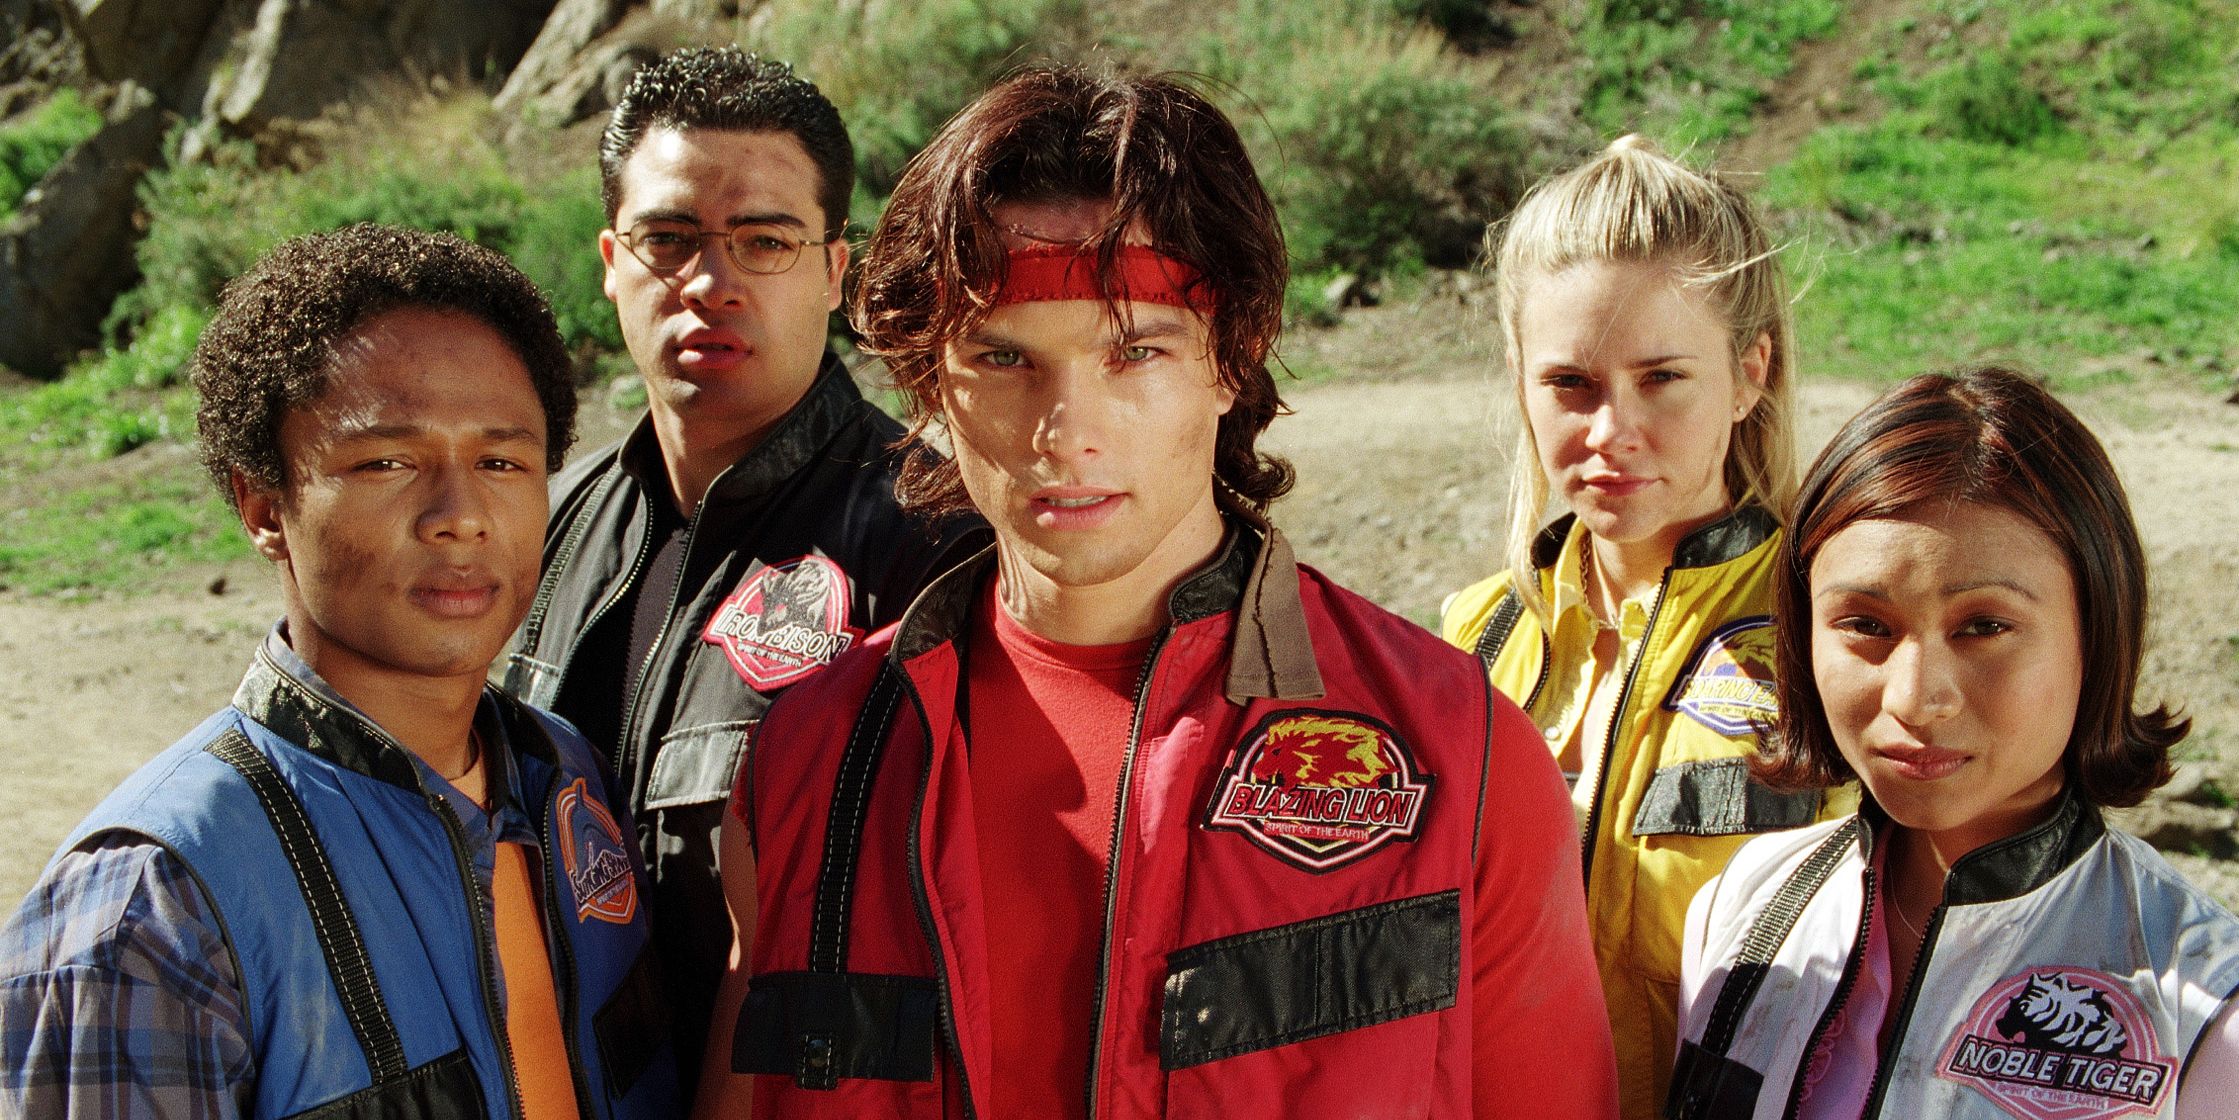 The Power Rangers Wild Force team stares at the camera out of uniform